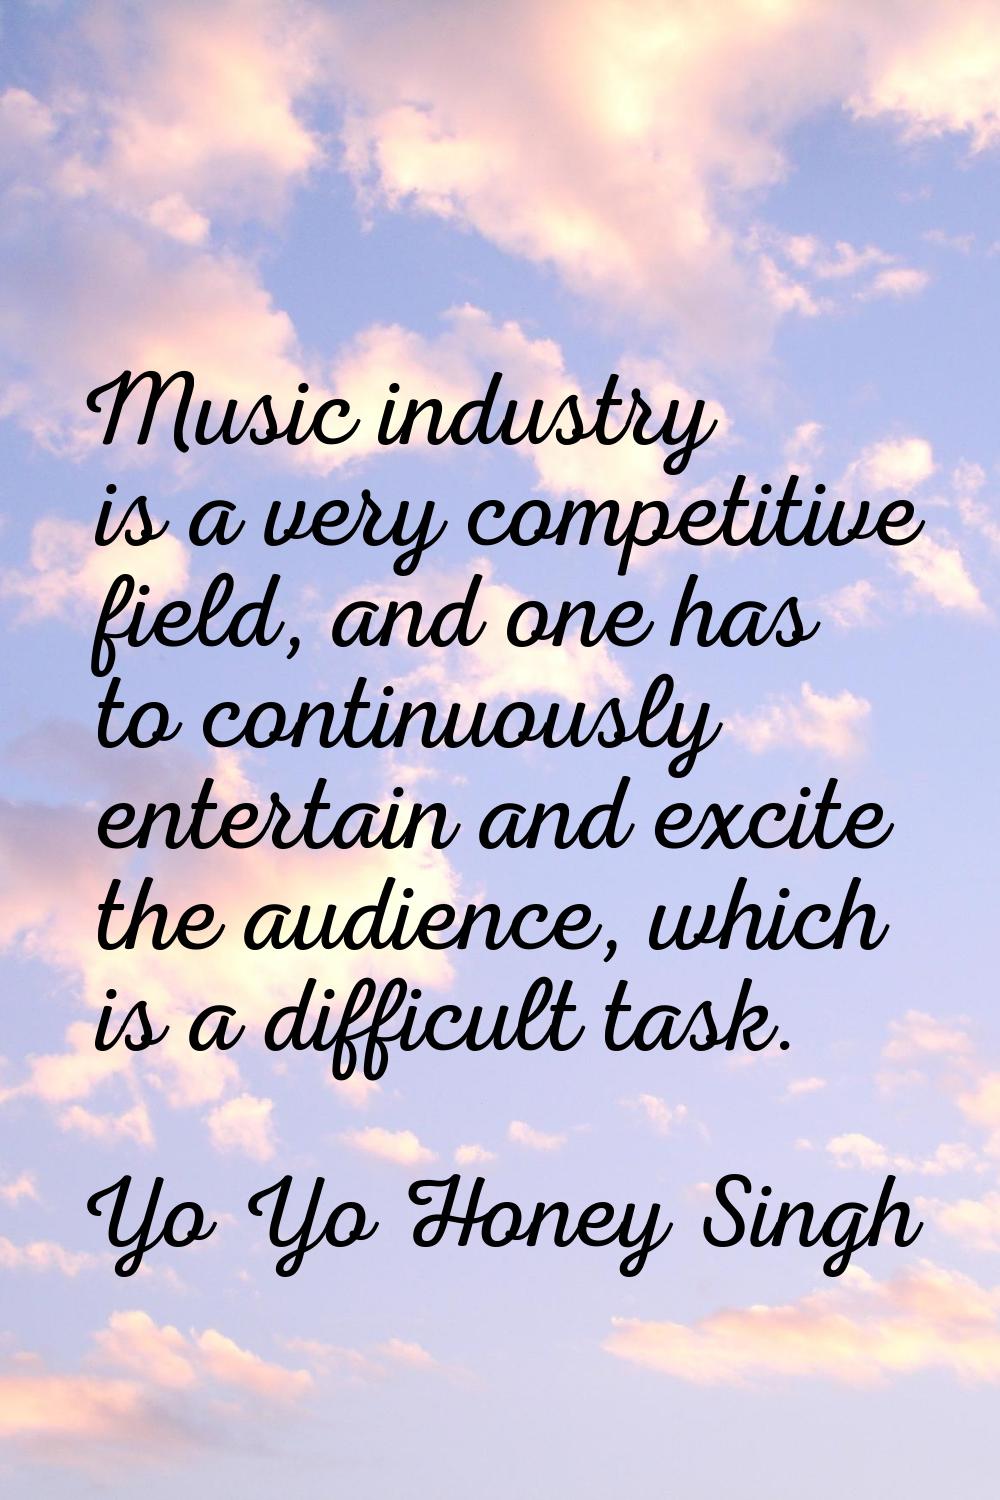 Music industry is a very competitive field, and one has to continuously entertain and excite the au